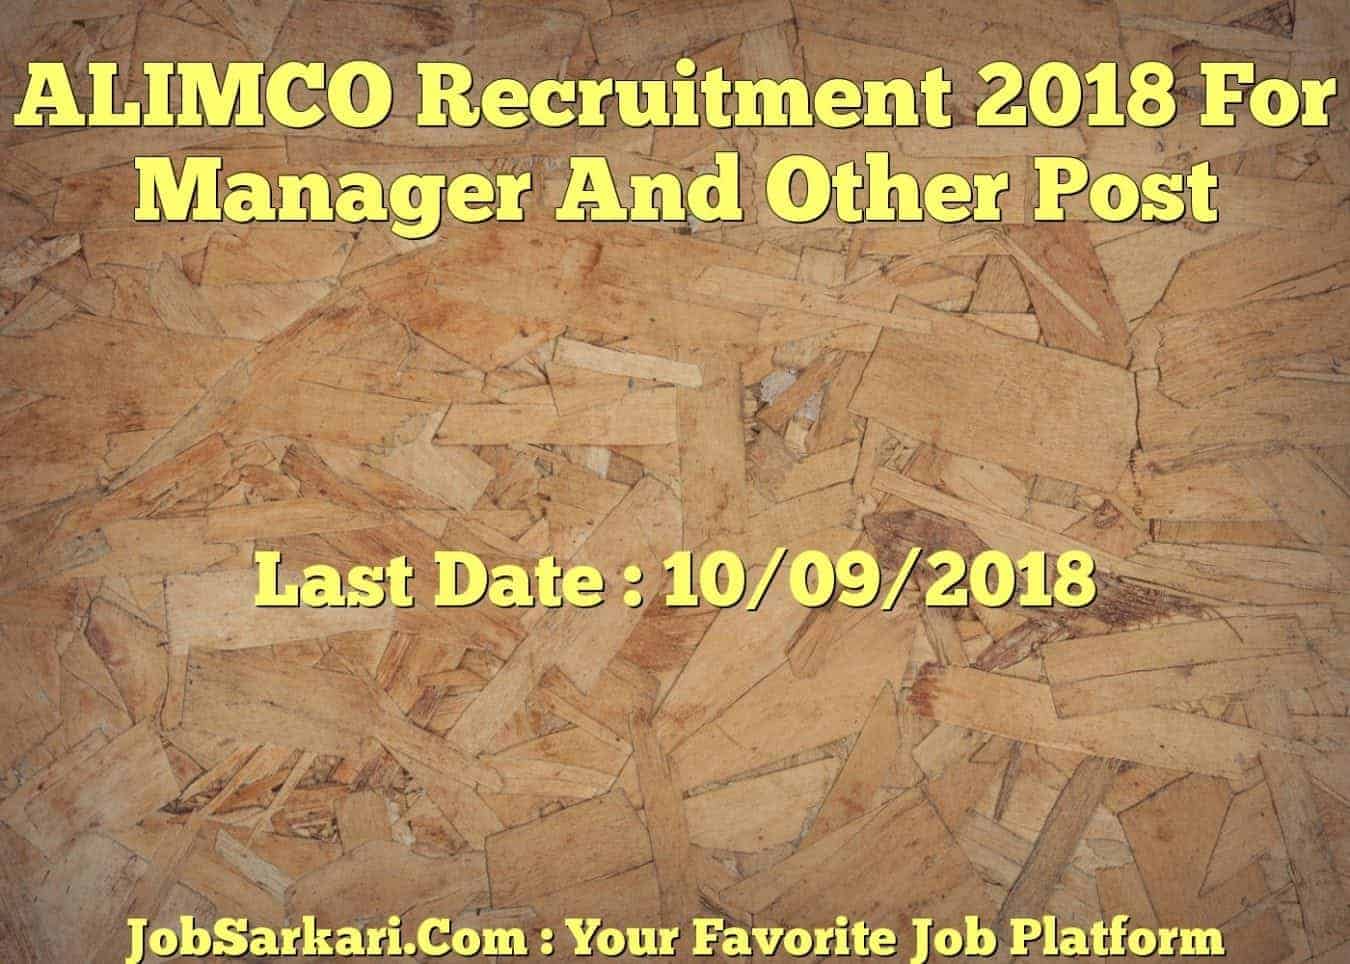 ALIMCO Recruitment 2018 For Manager And Other Post